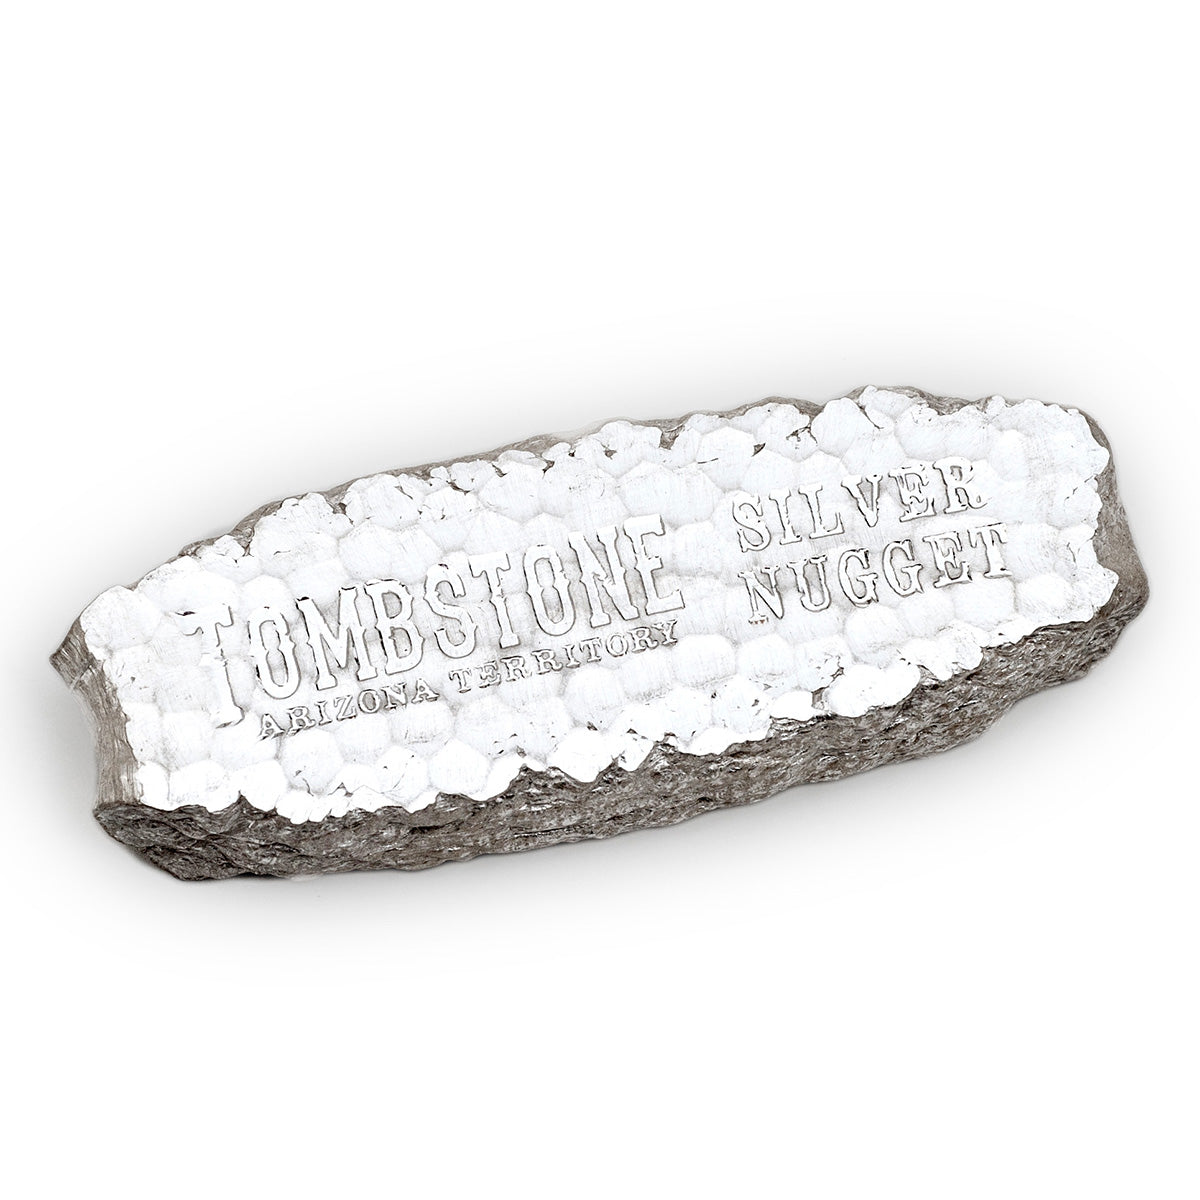 Scottsdale Tombstone Nugget 10 oz Silver Bar